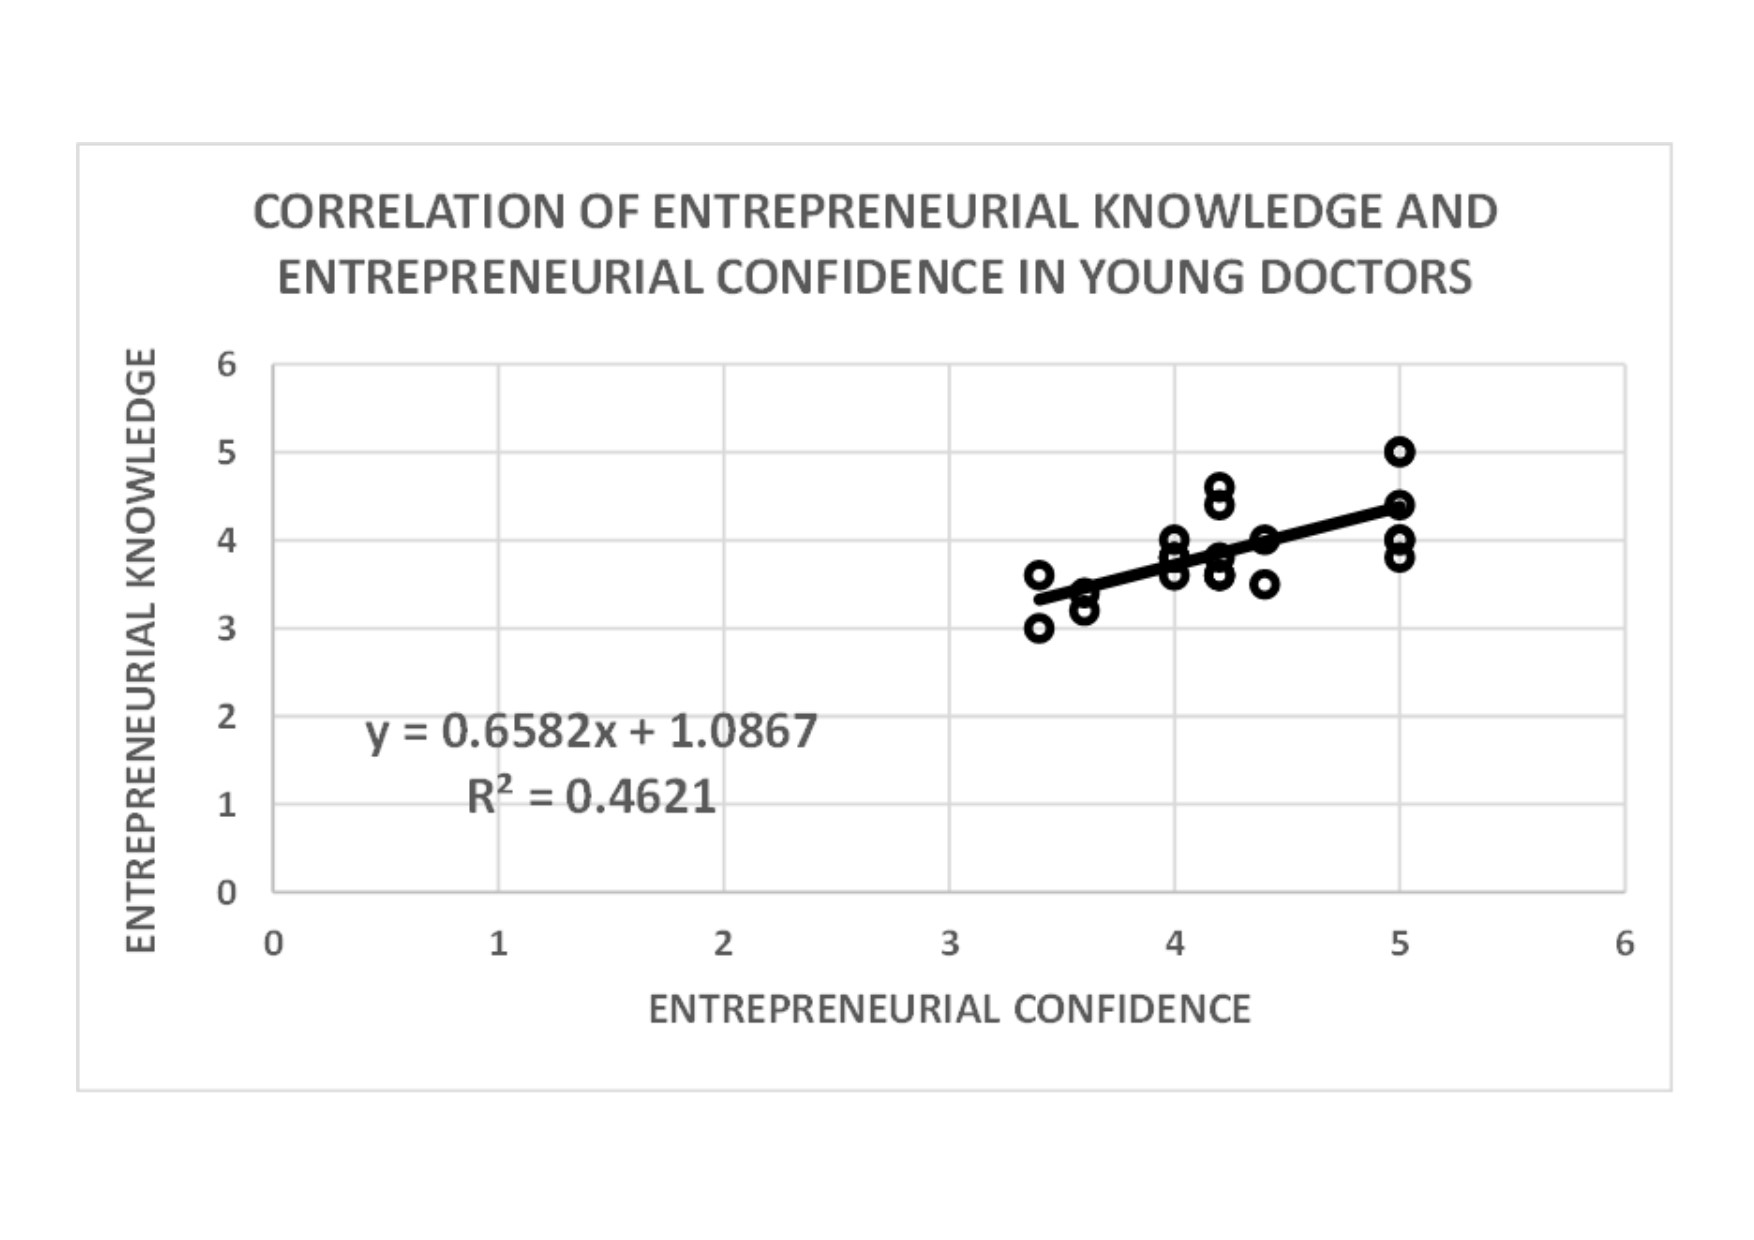 Entrepreneurial Confidence depends moderately on indicators of intelligence, Transformative Knowledge and Entrepreneurial Knowledge, in graduating young doctors of LASUCOM